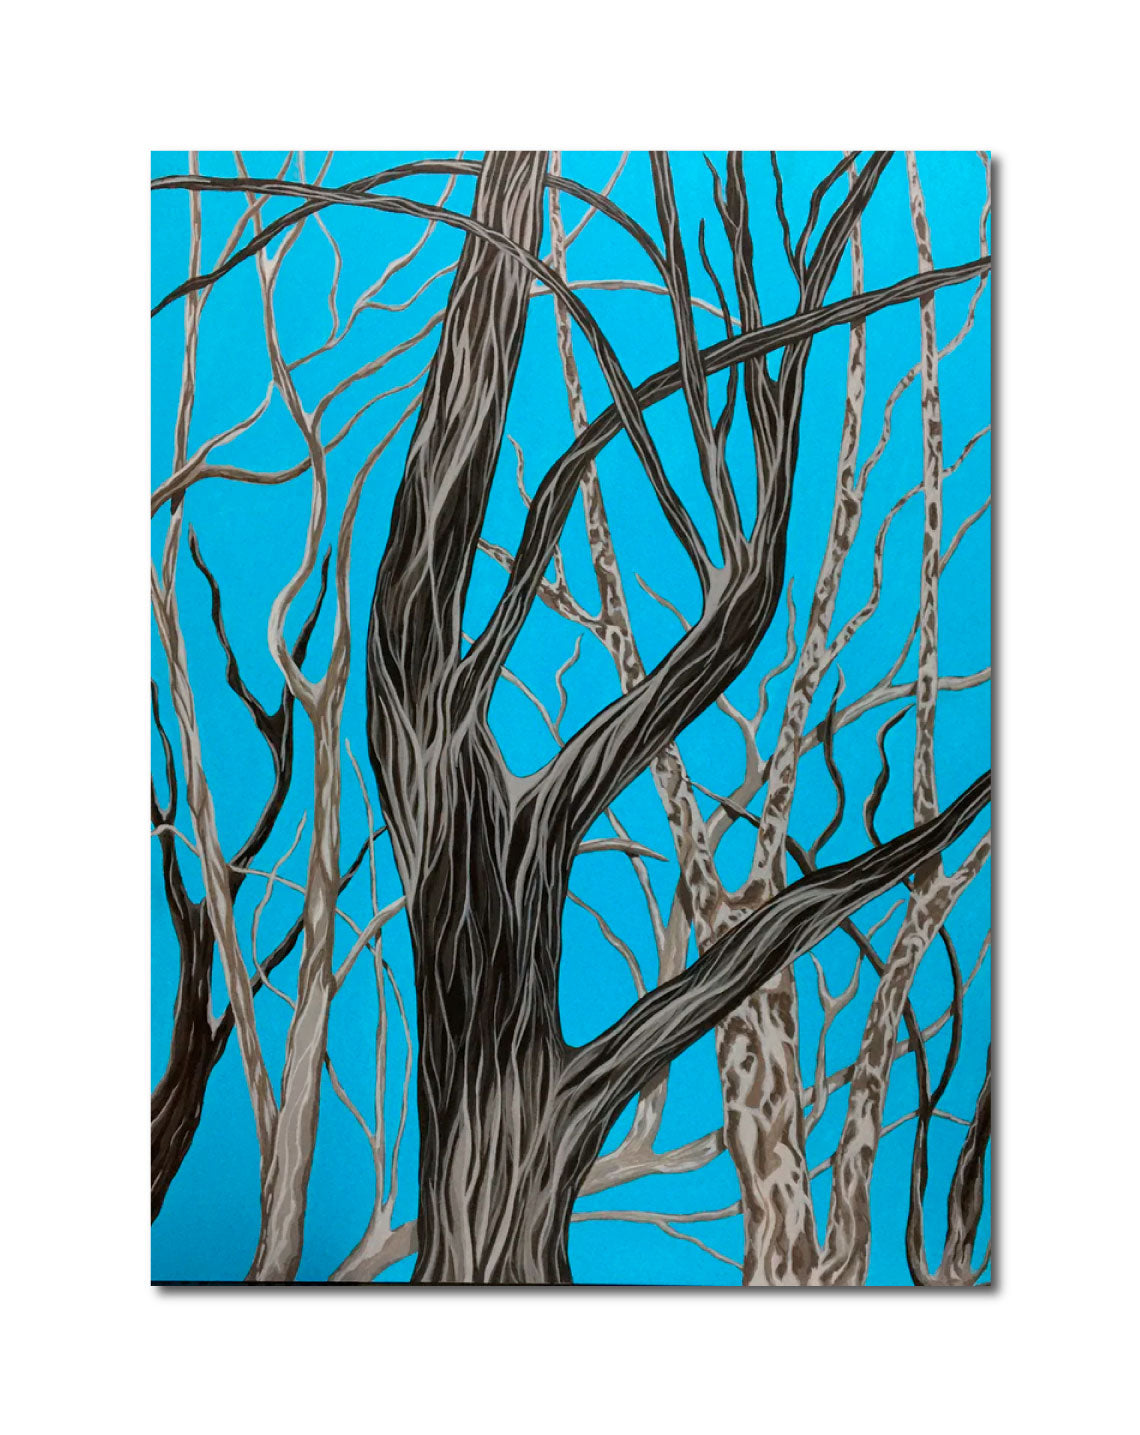 'BARE TREES ON A CHILLY DAY' - Acrylic on Hardboard Panel